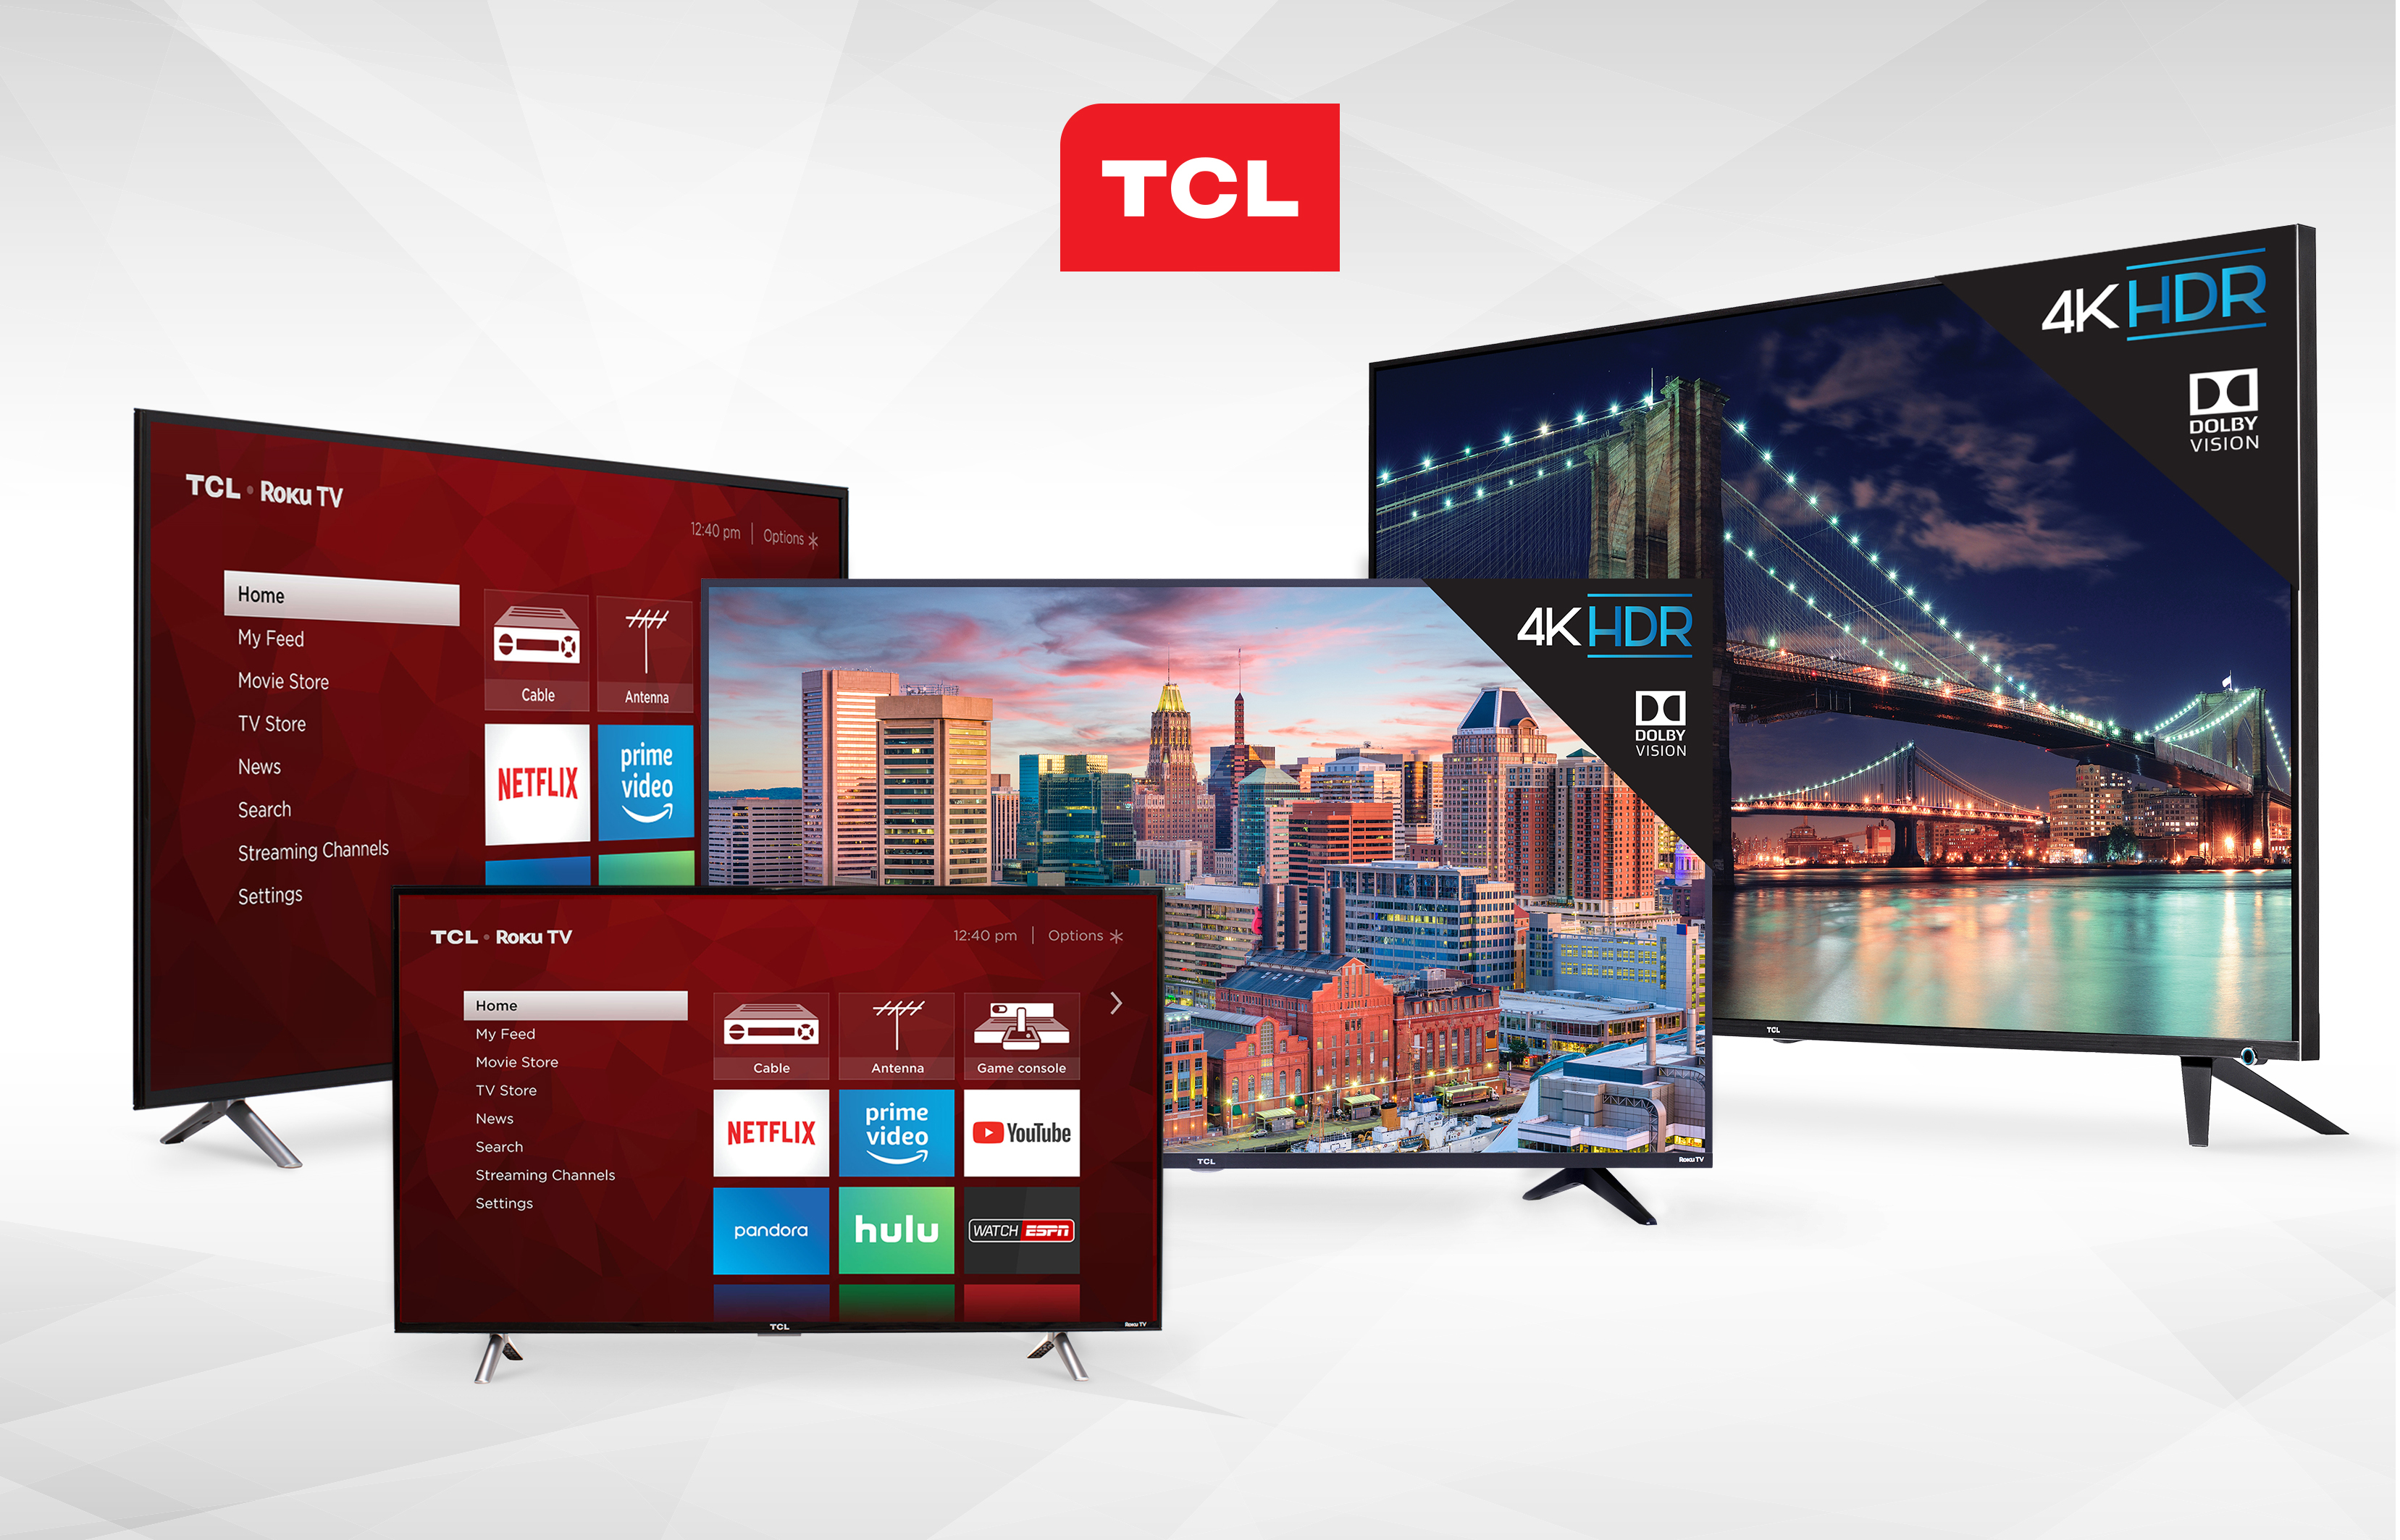 TCL Releases Premium Roku TVs, Adding Even More Models With Dolby Vision HDR – Rokuki3314 x 2127